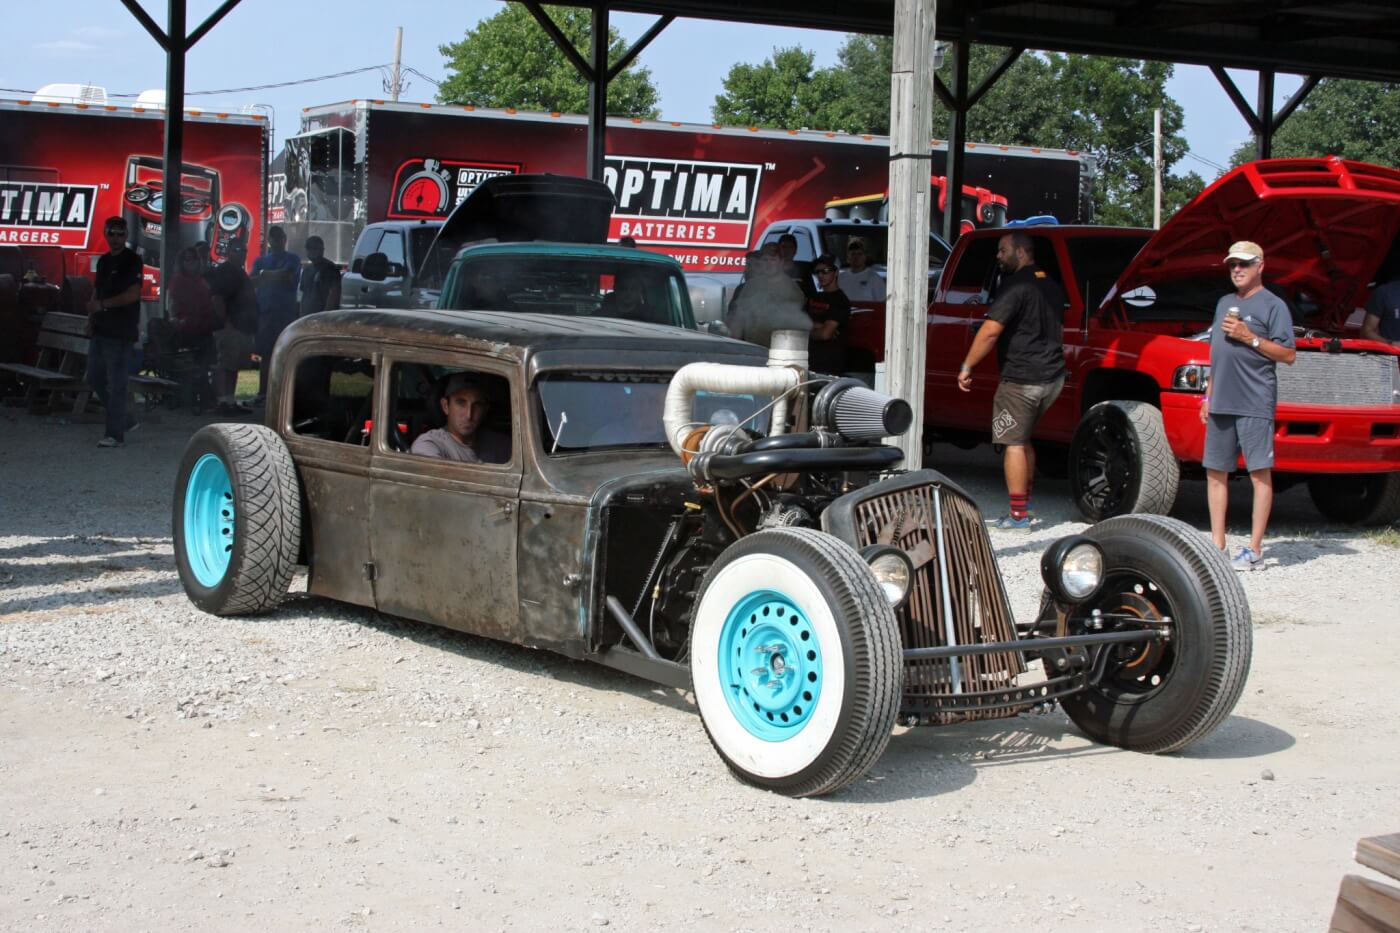 Larry Kilburn took home the Best Custom Award with his Cummins-powered custom rat rod in Friday’s Show-N-Shine competition.